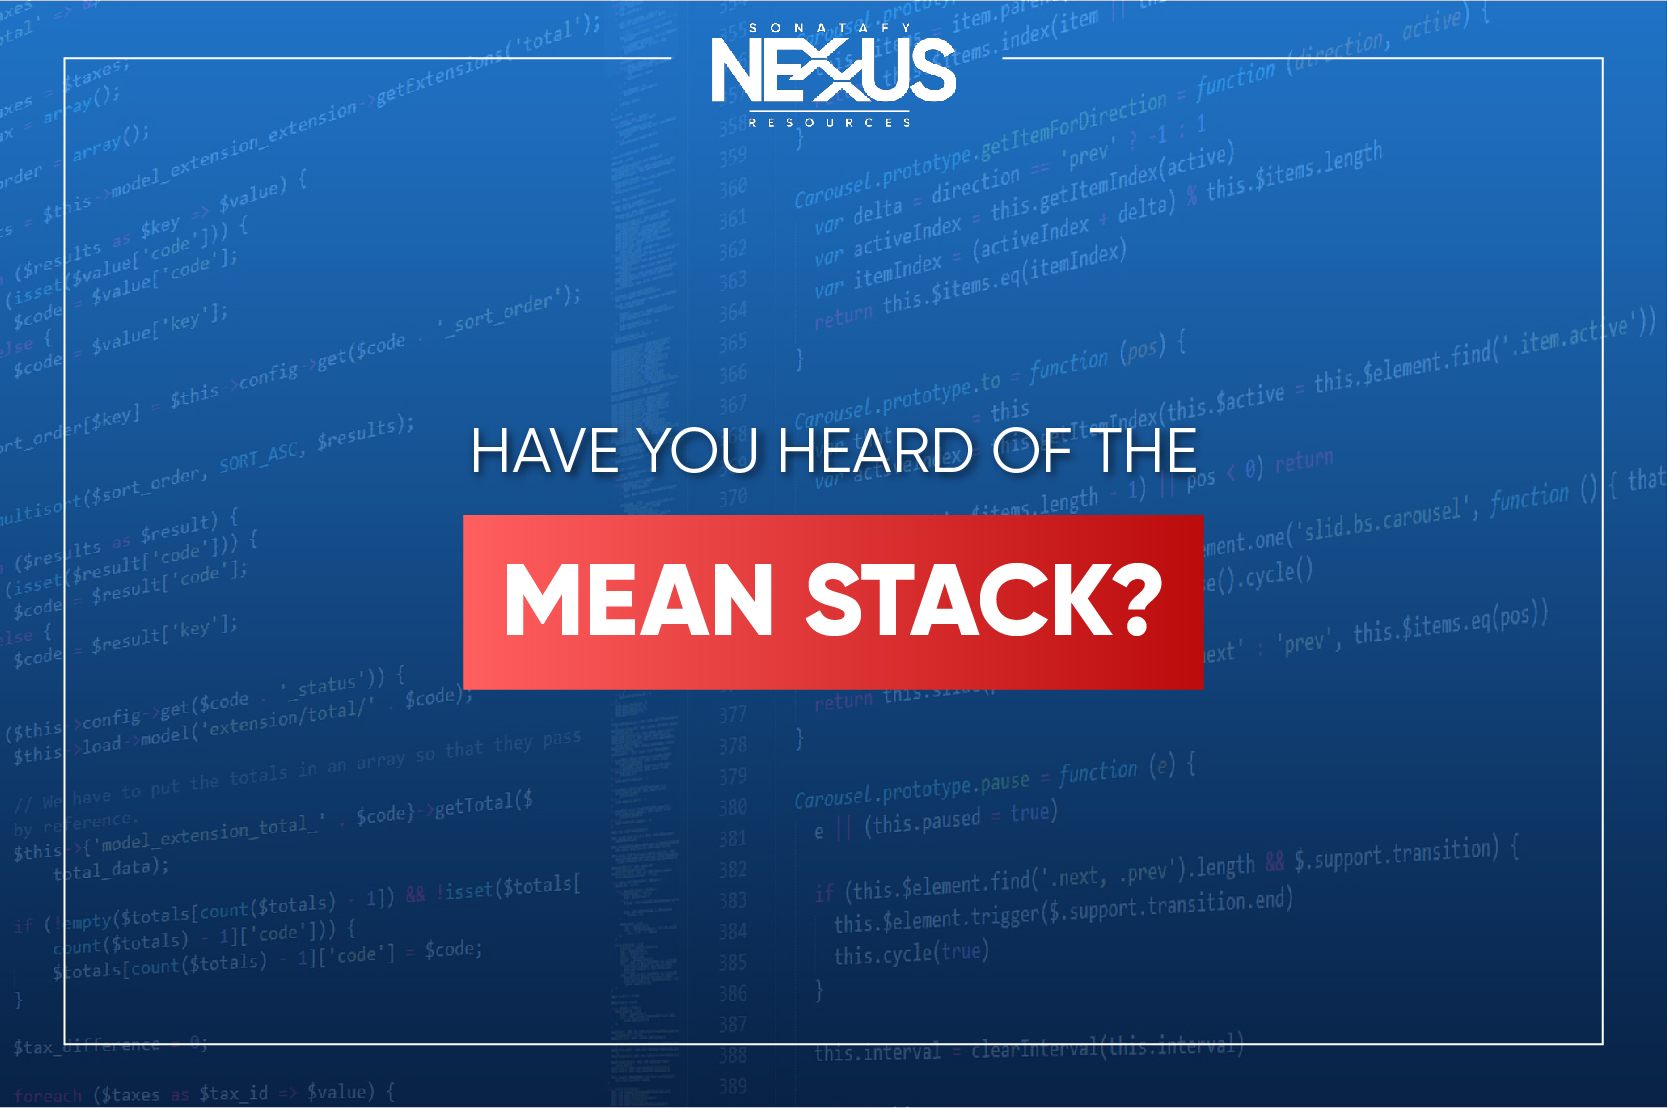 Are you heard of the MEAN stack?